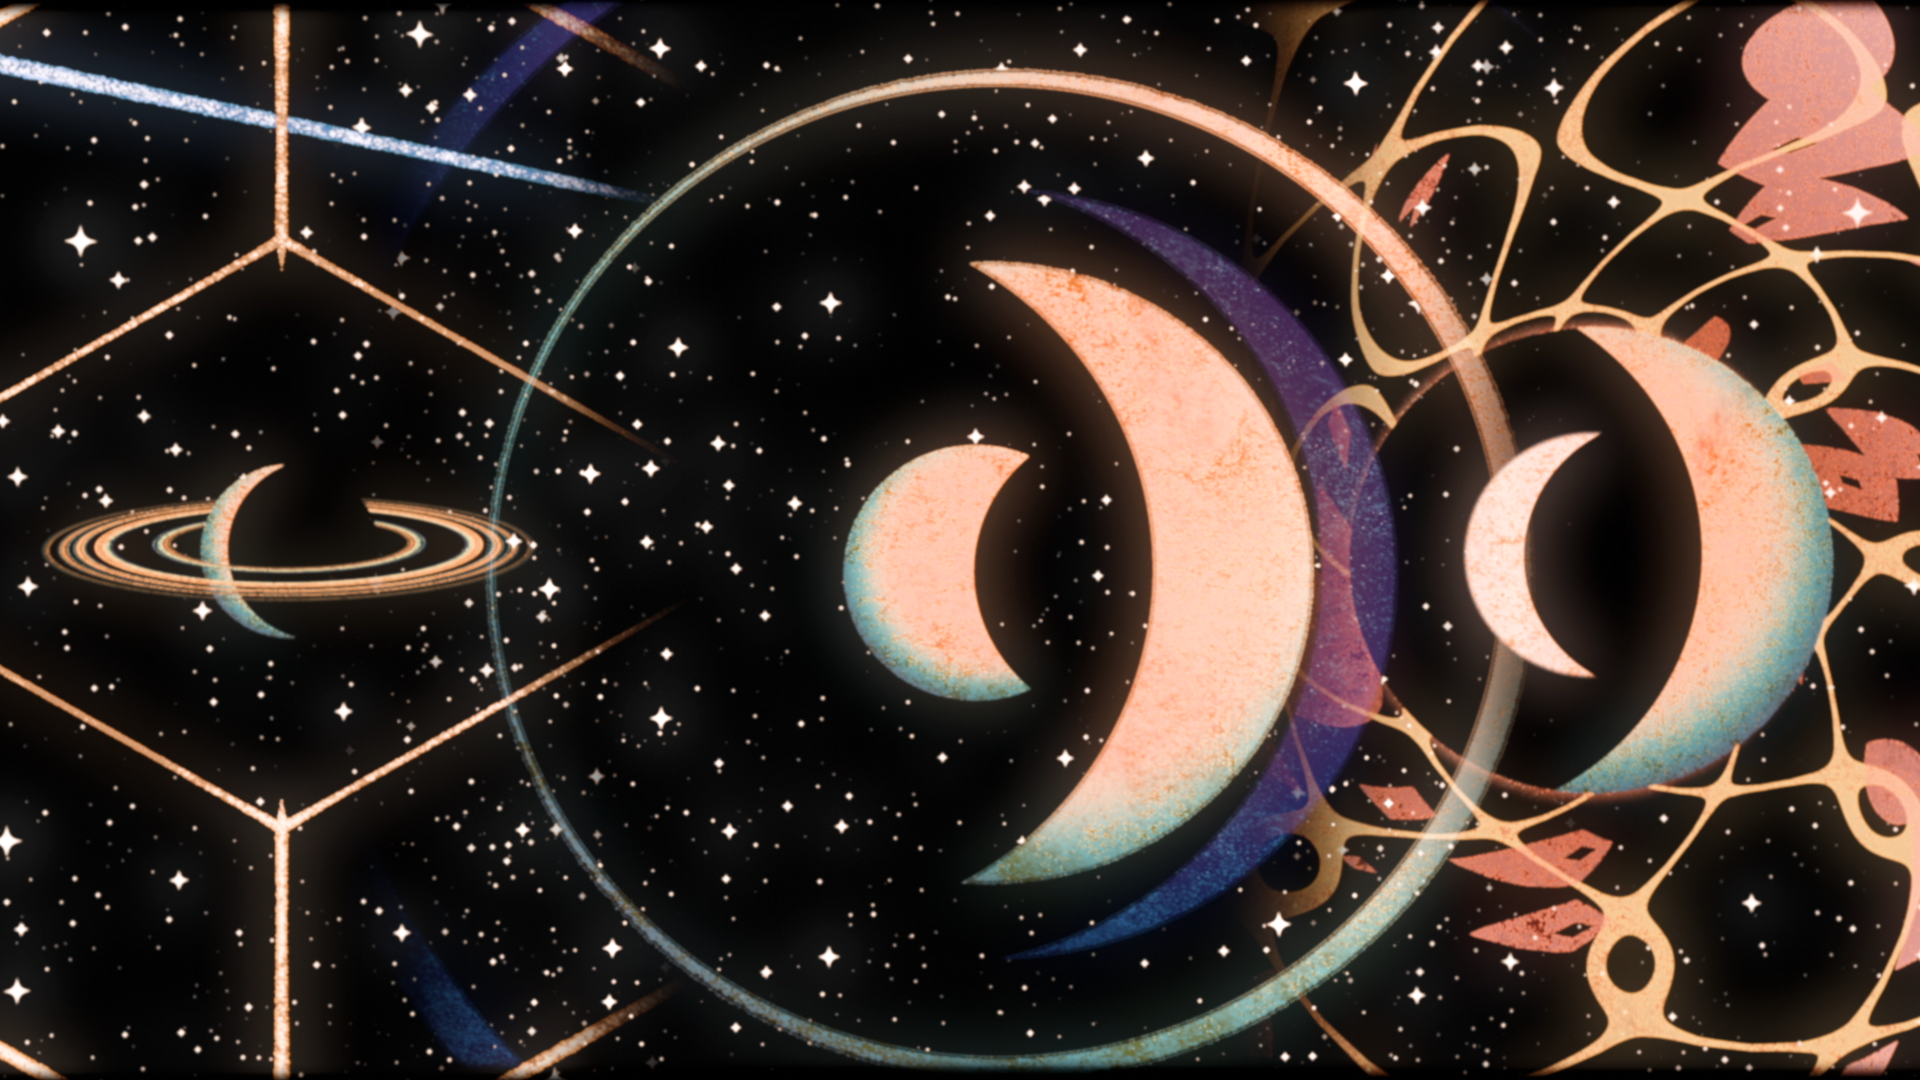 Cartoon-style moons and stars from the video for Soft Death